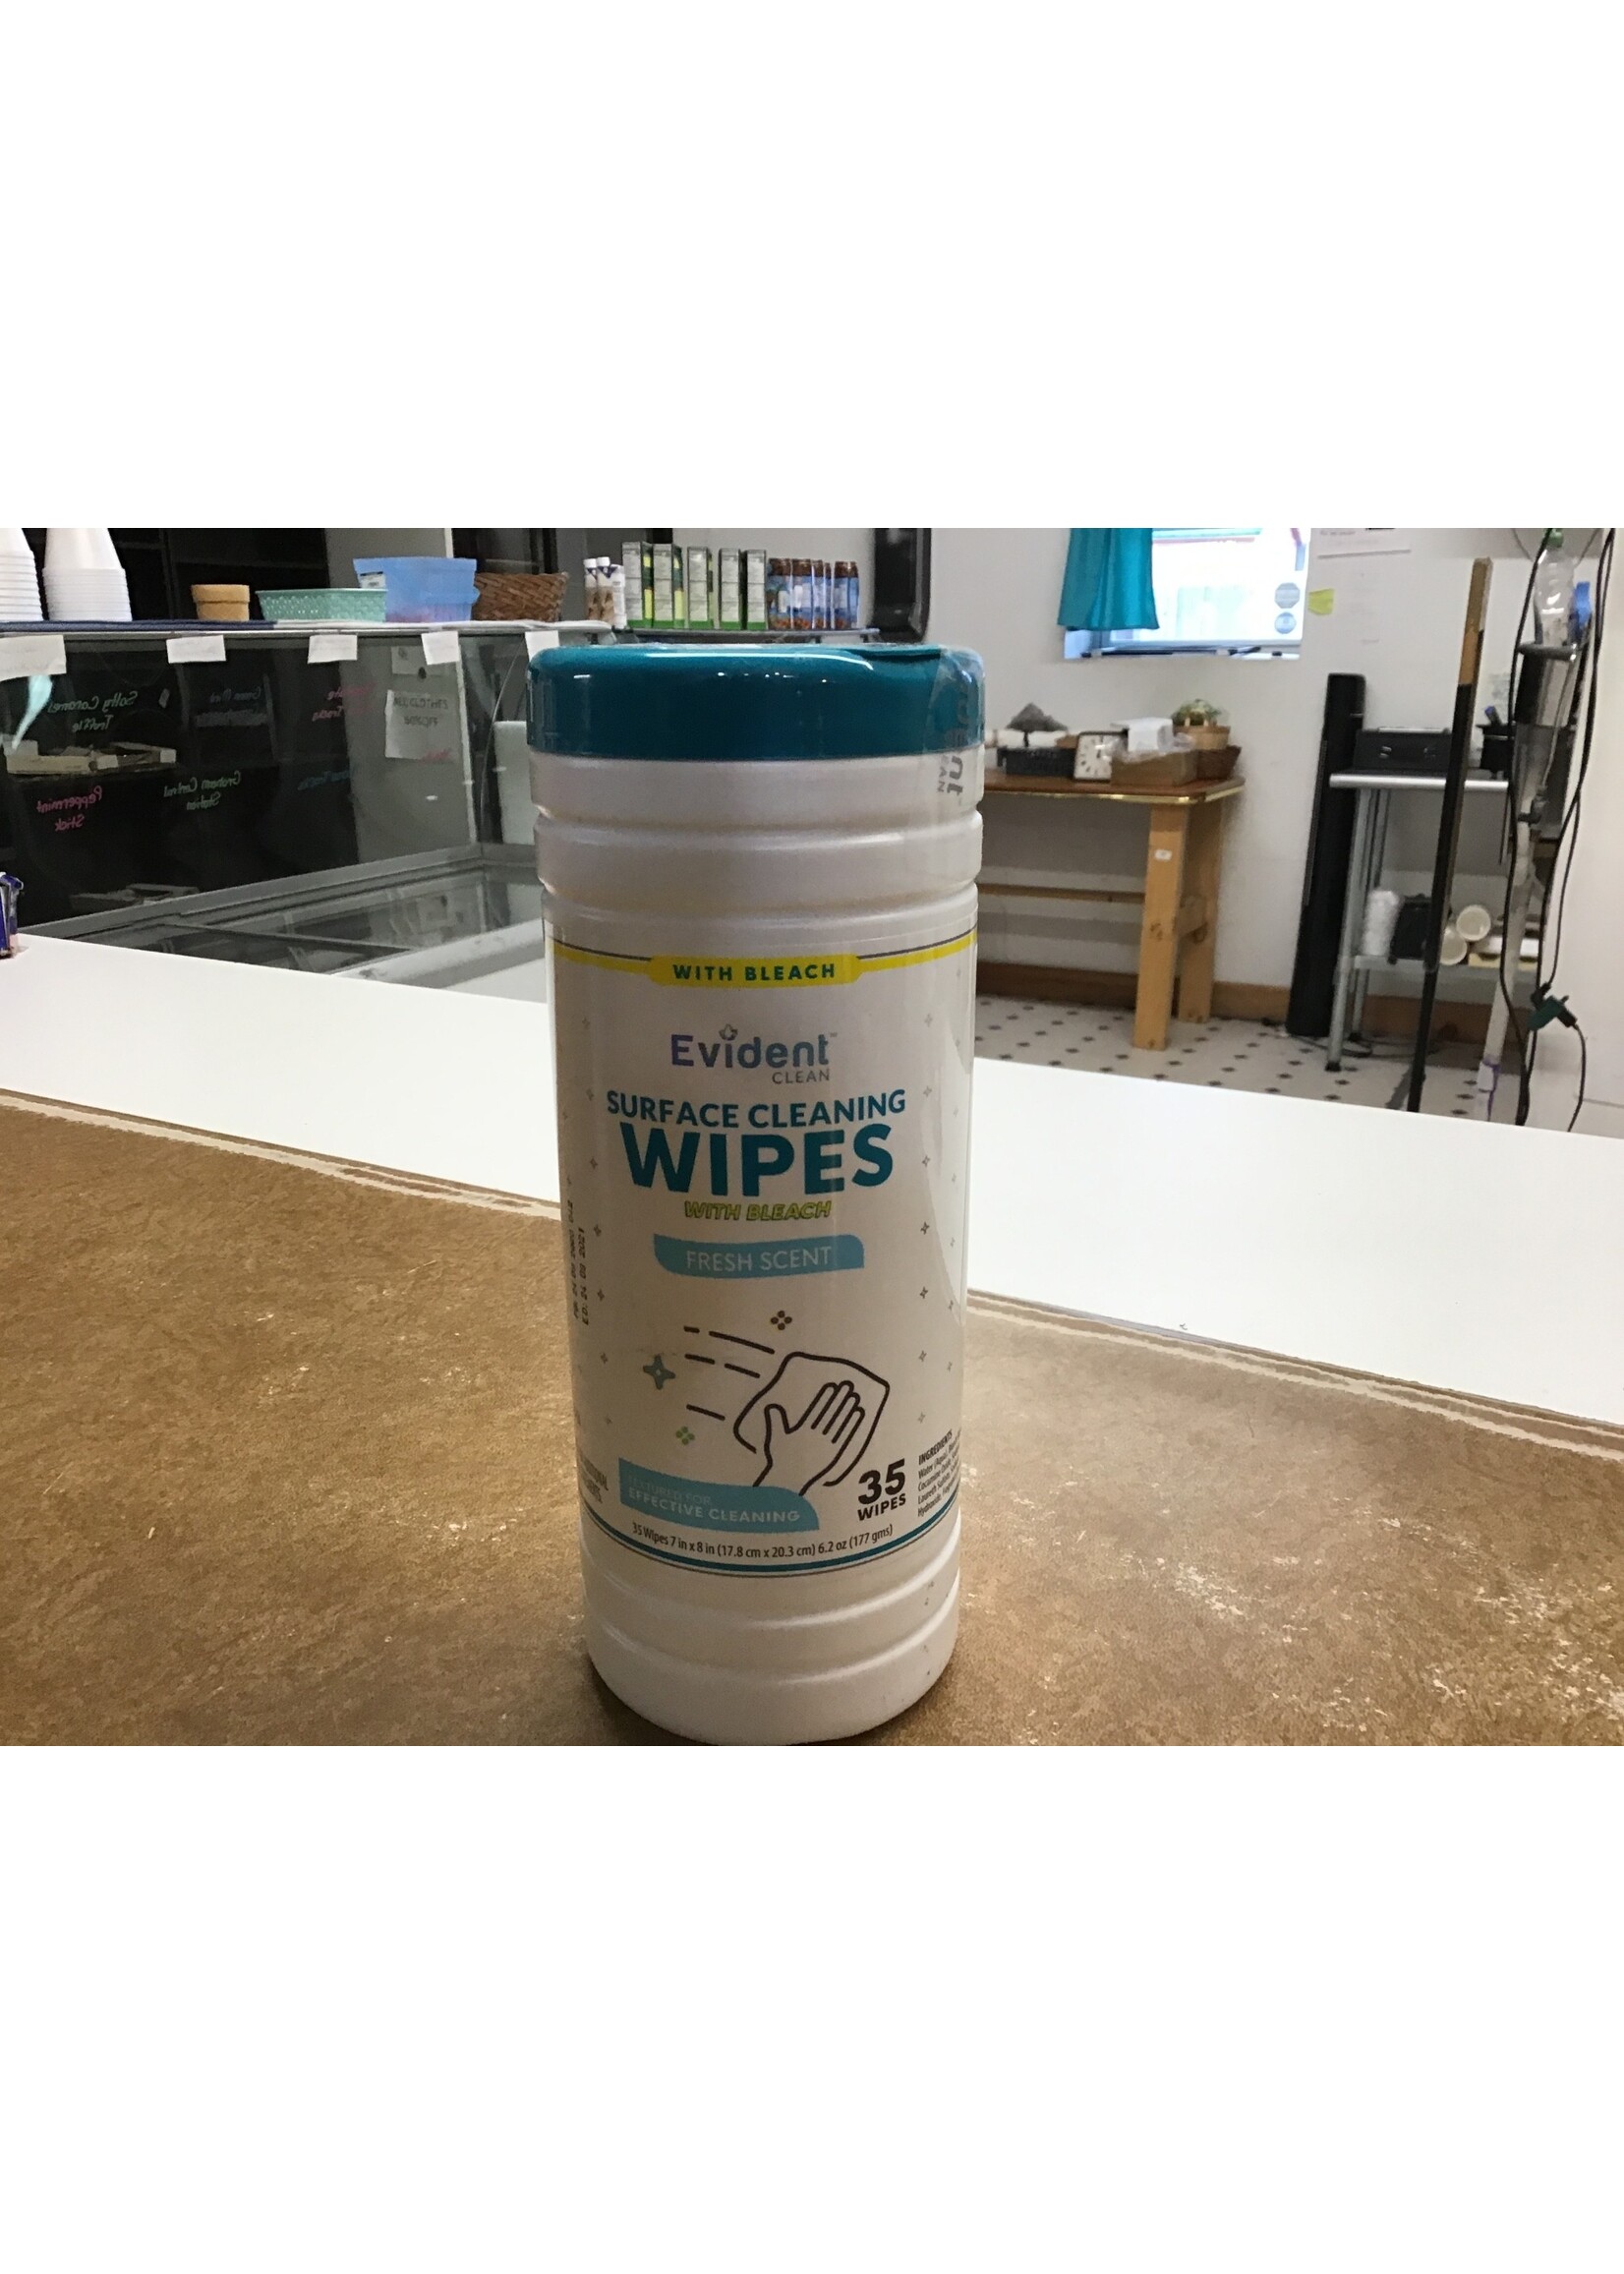 Evident Surface Cleaning Wipes with Bleach - 35ct